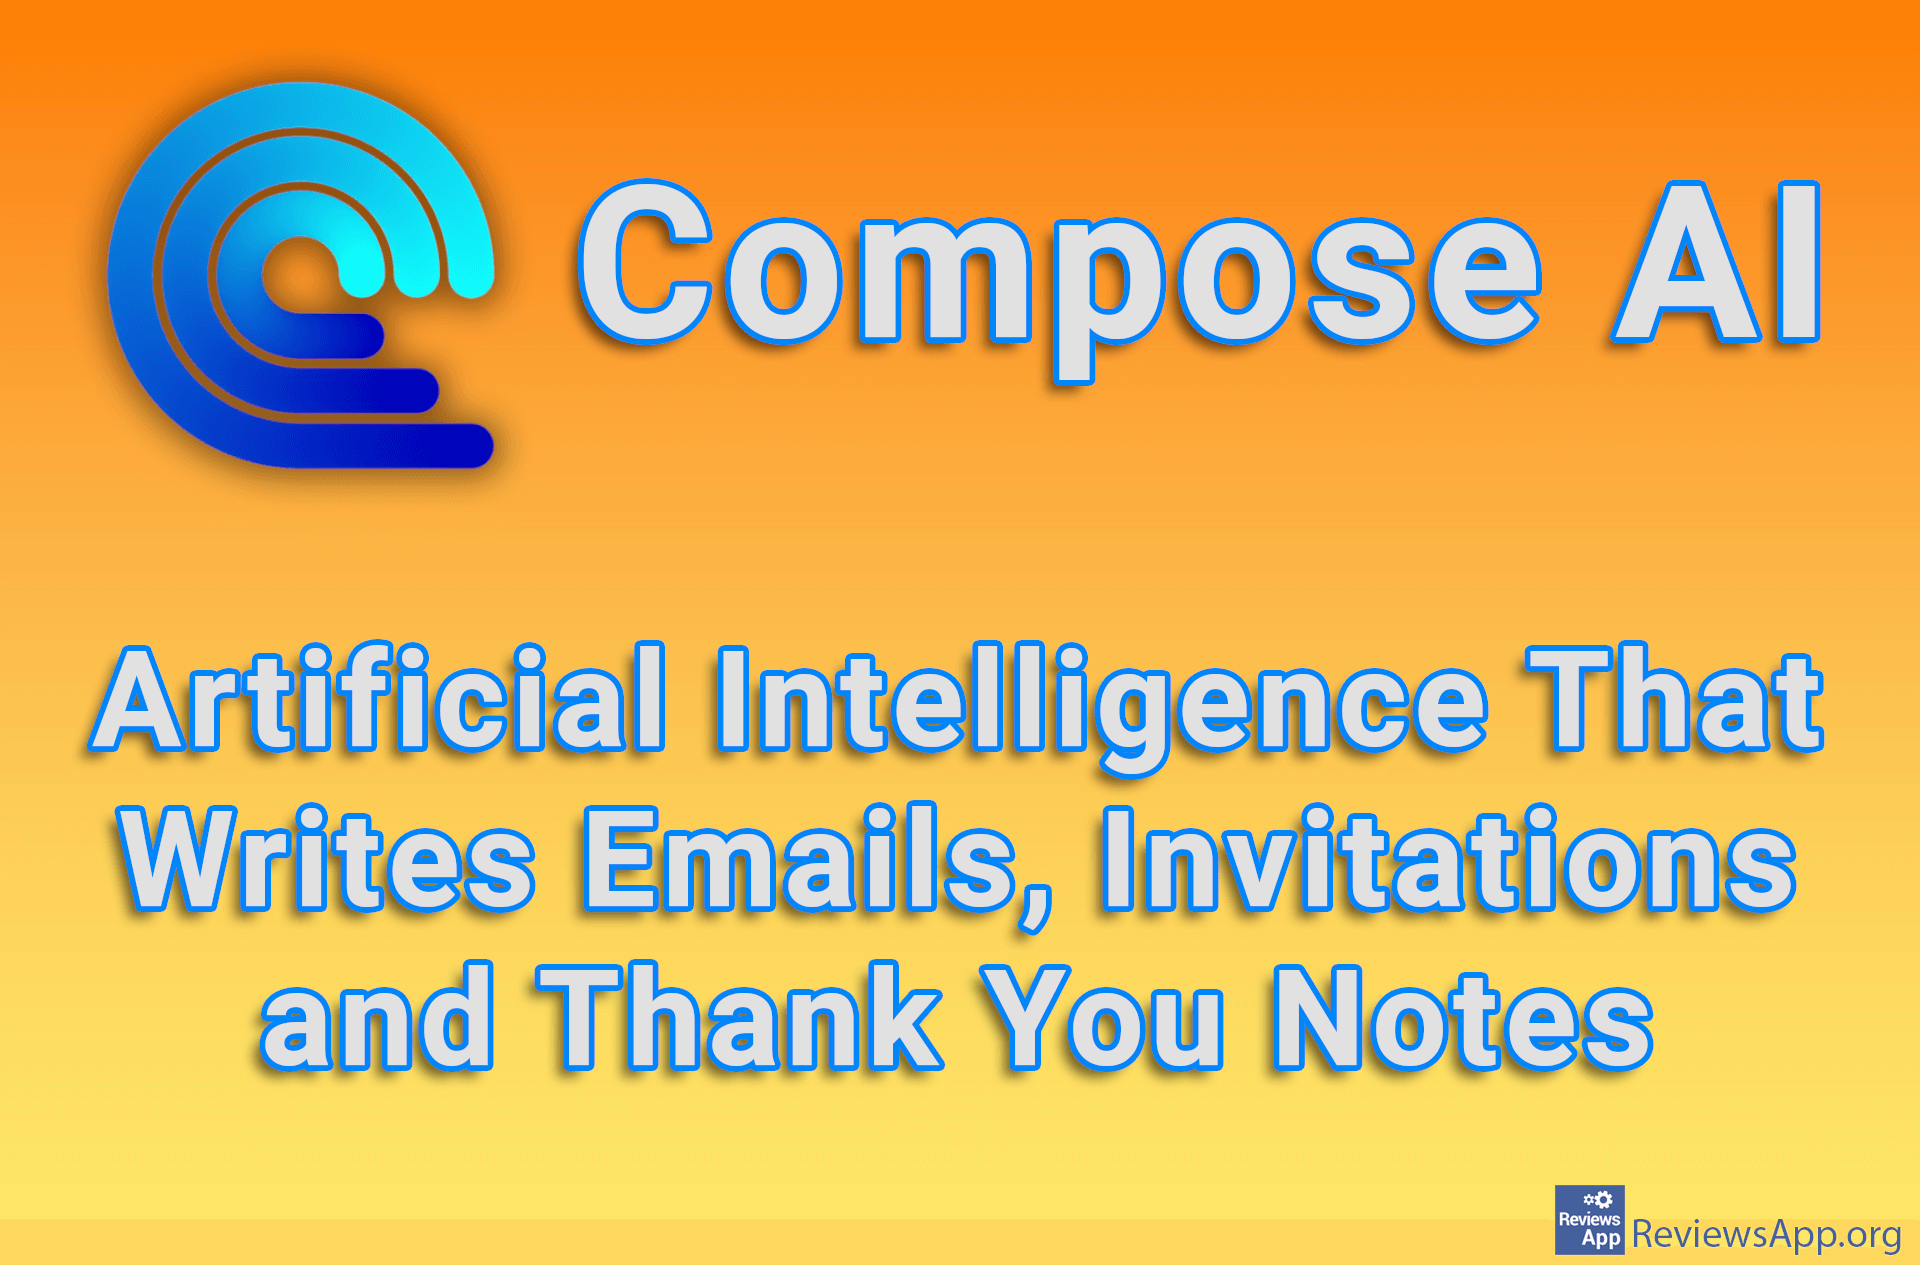 Compose AI – Artificial Intelligence That Writes Emails, Invitations and Thank You Notes